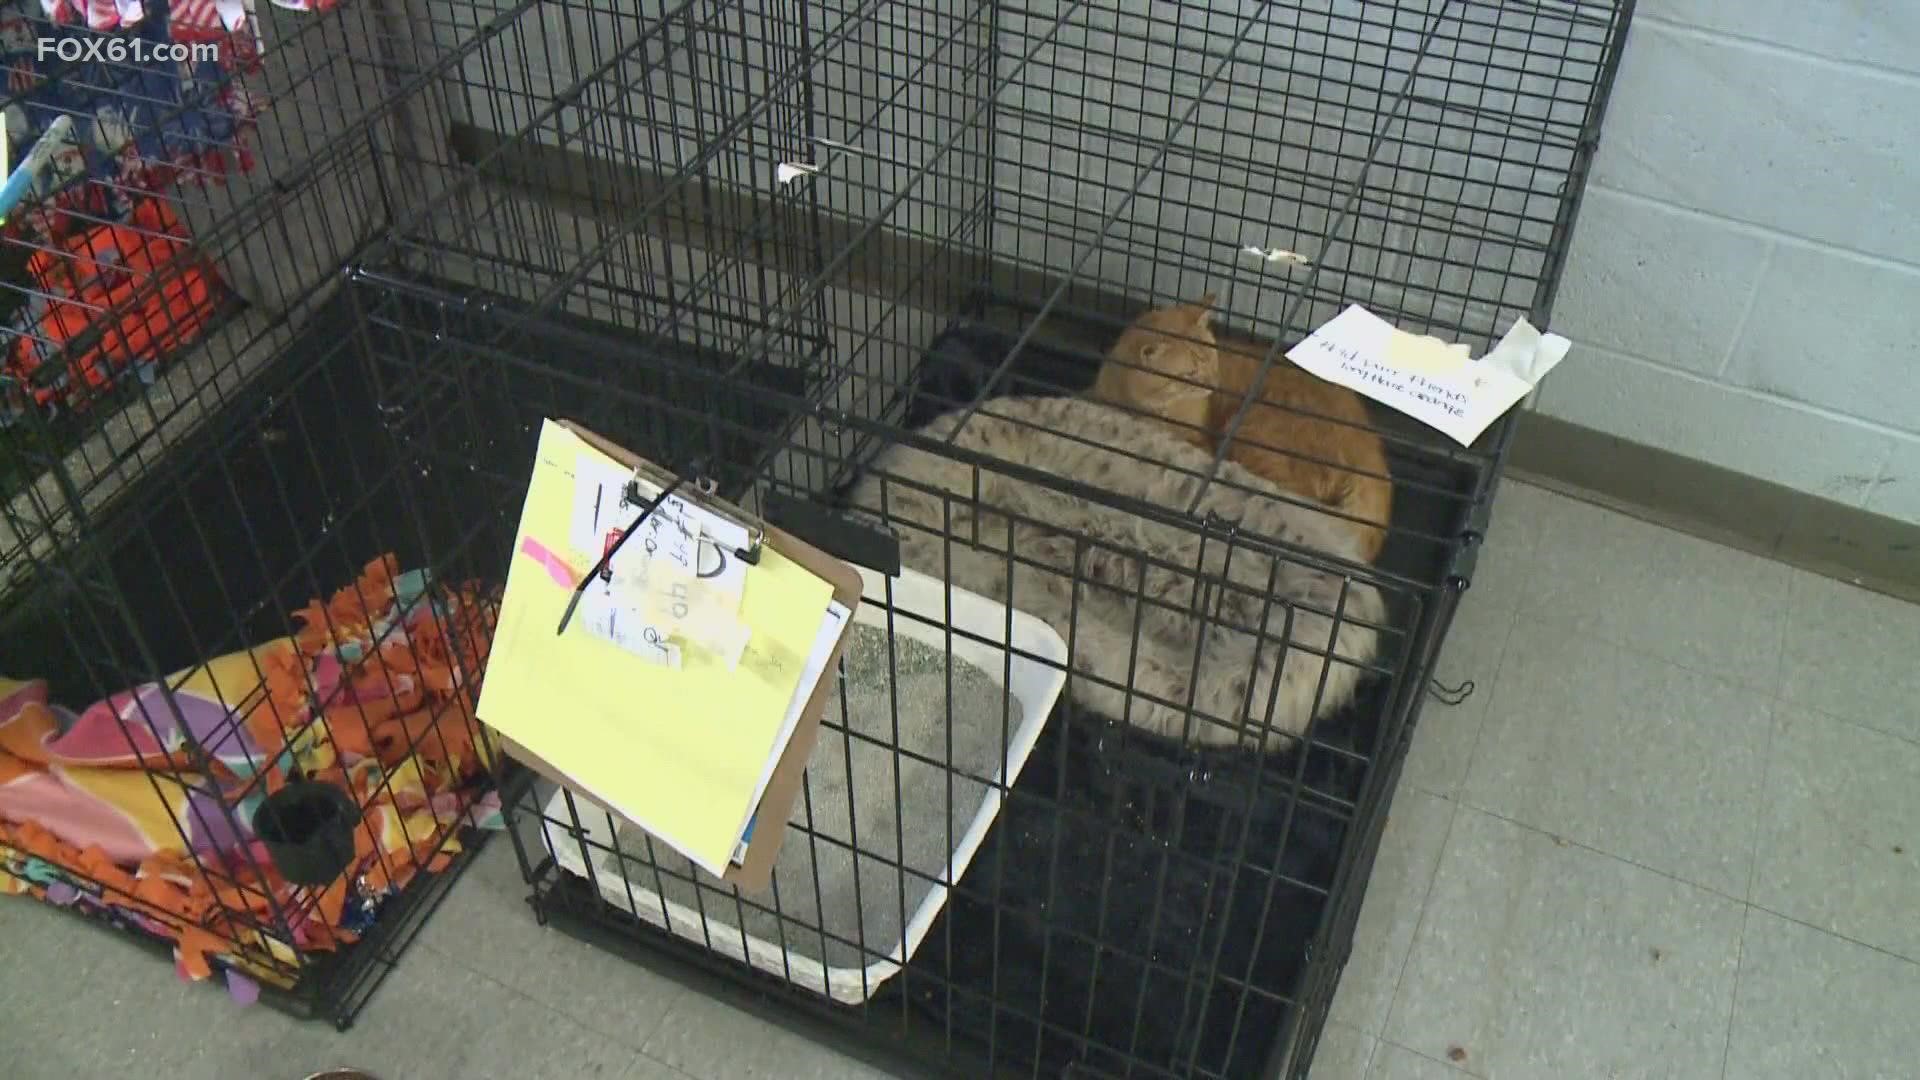 Members of the family accused of hoarding nearly 200 animals in a Winchester home are set to appear before a judge on Wednesday.